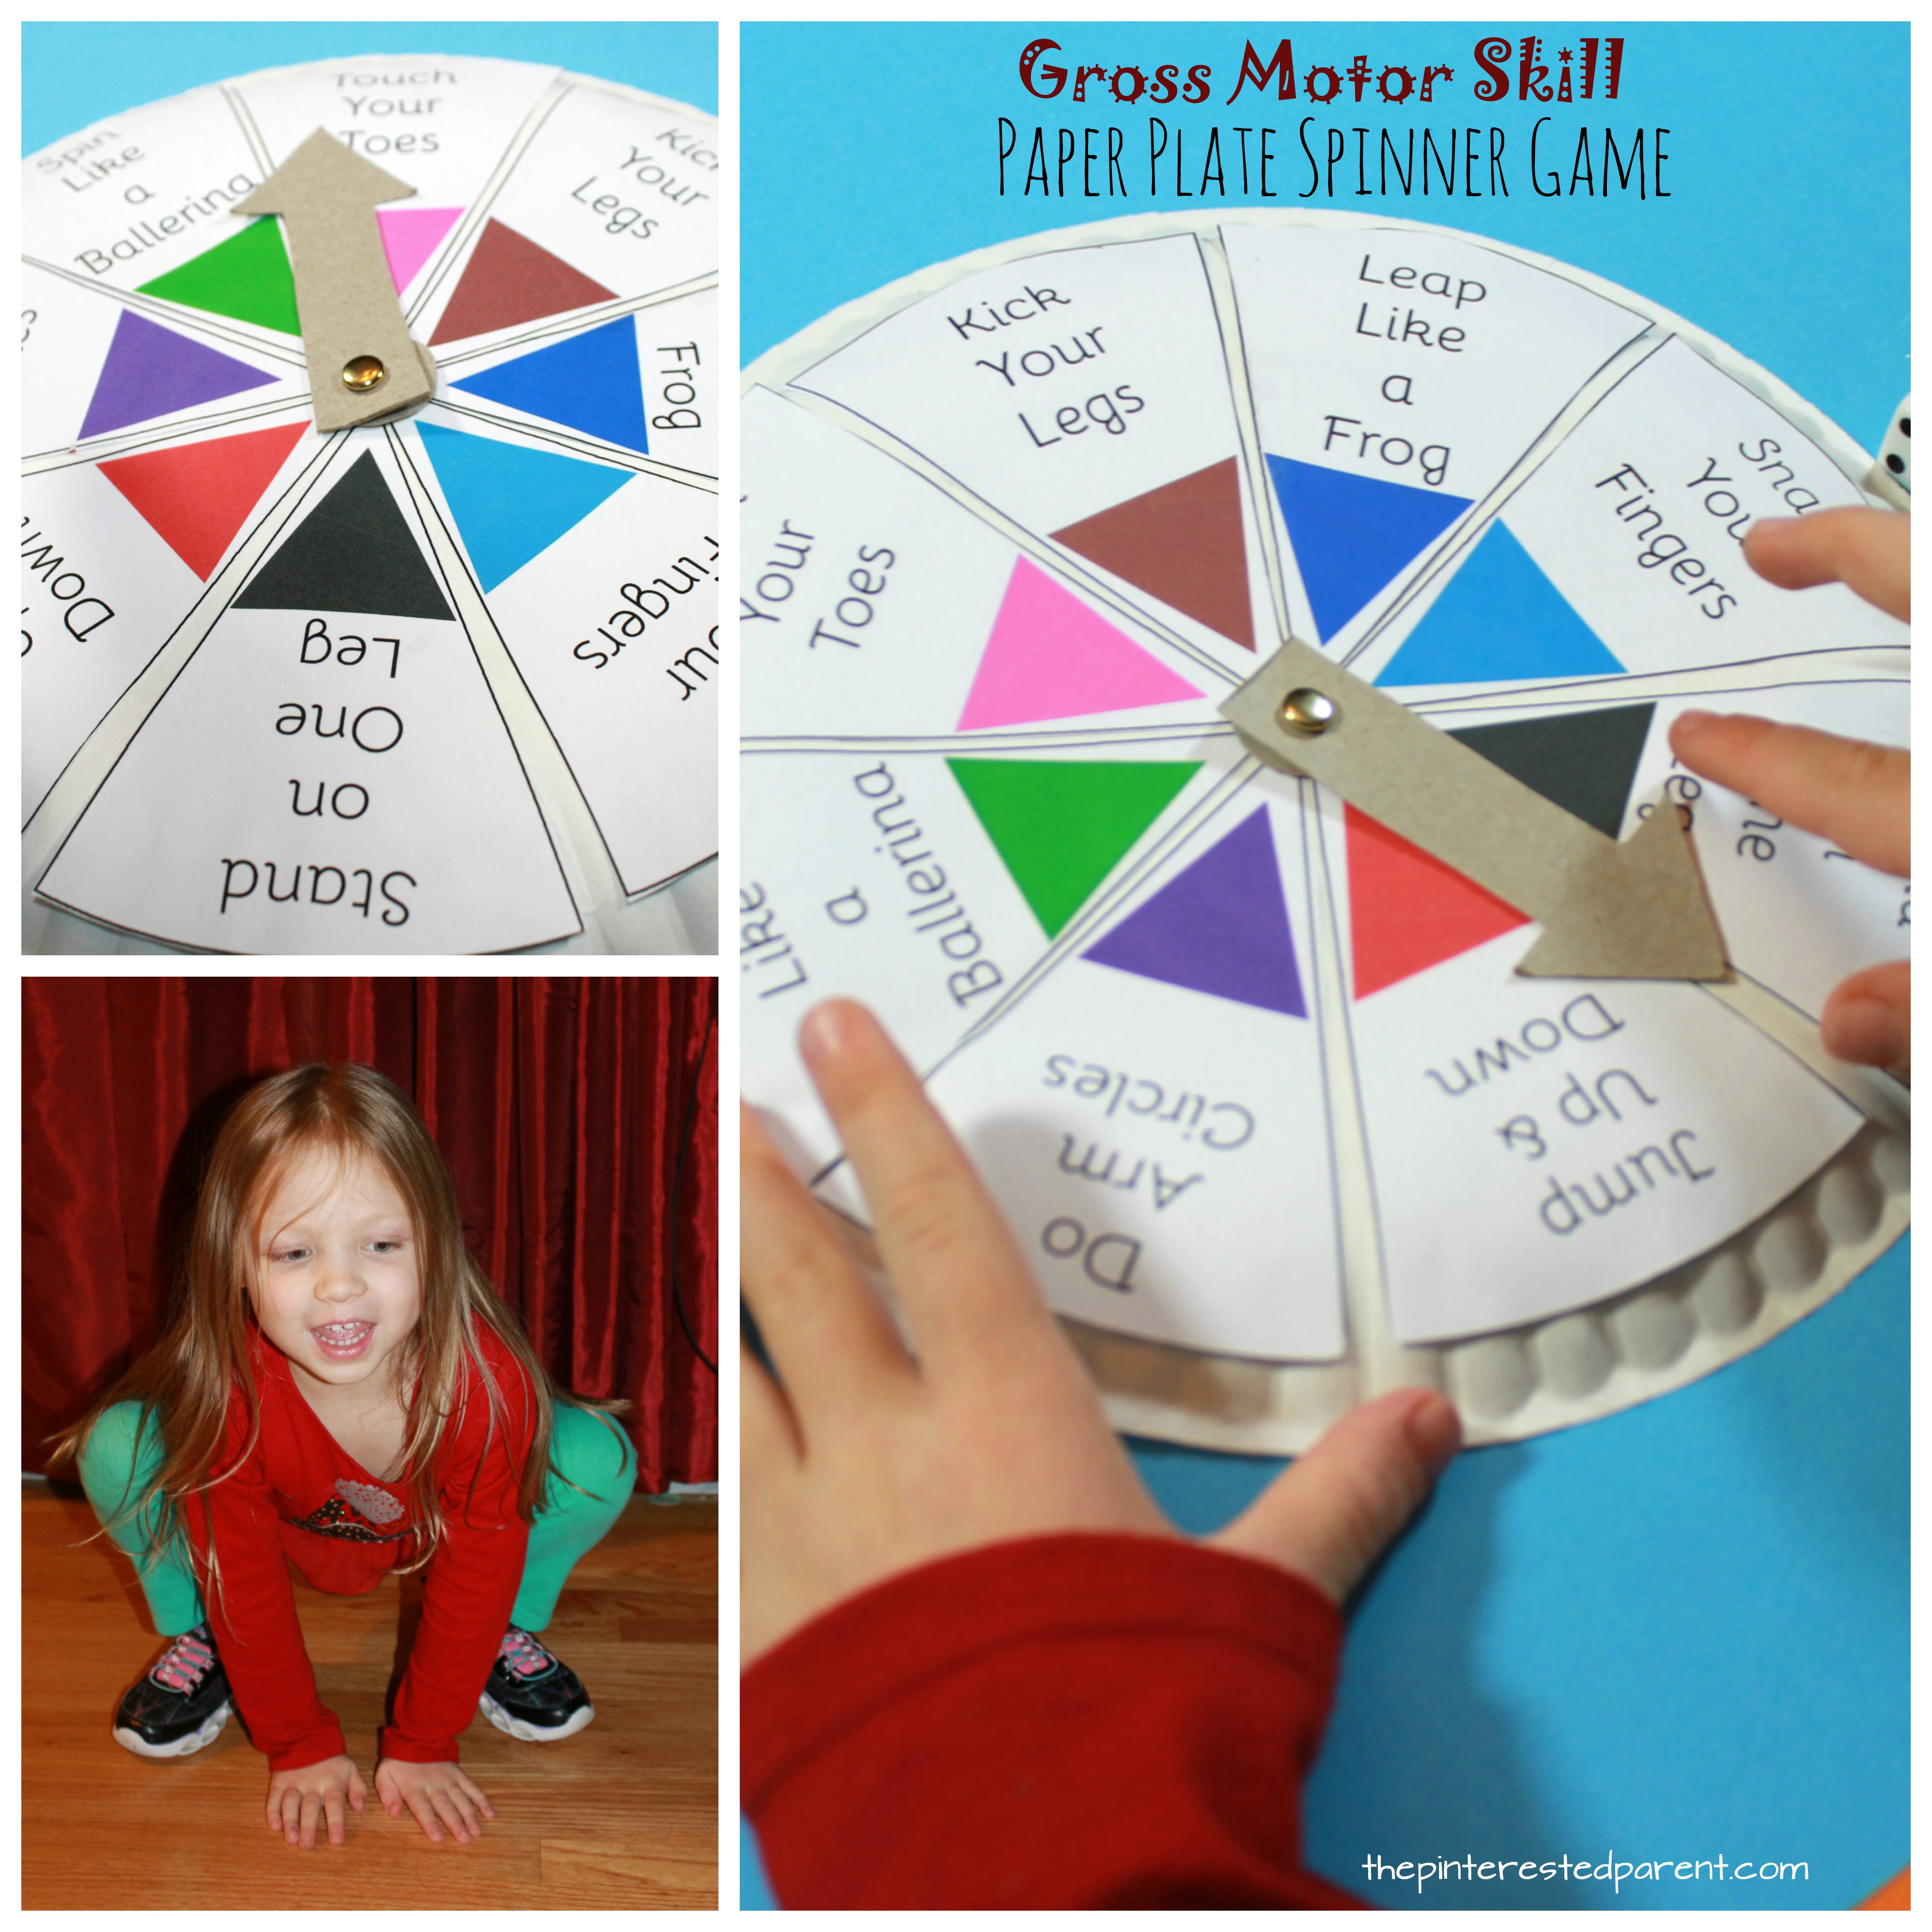 Spin, Roll & Count Gross Motor Skill Game - paper plate spinner game for toddlers and preschoolers